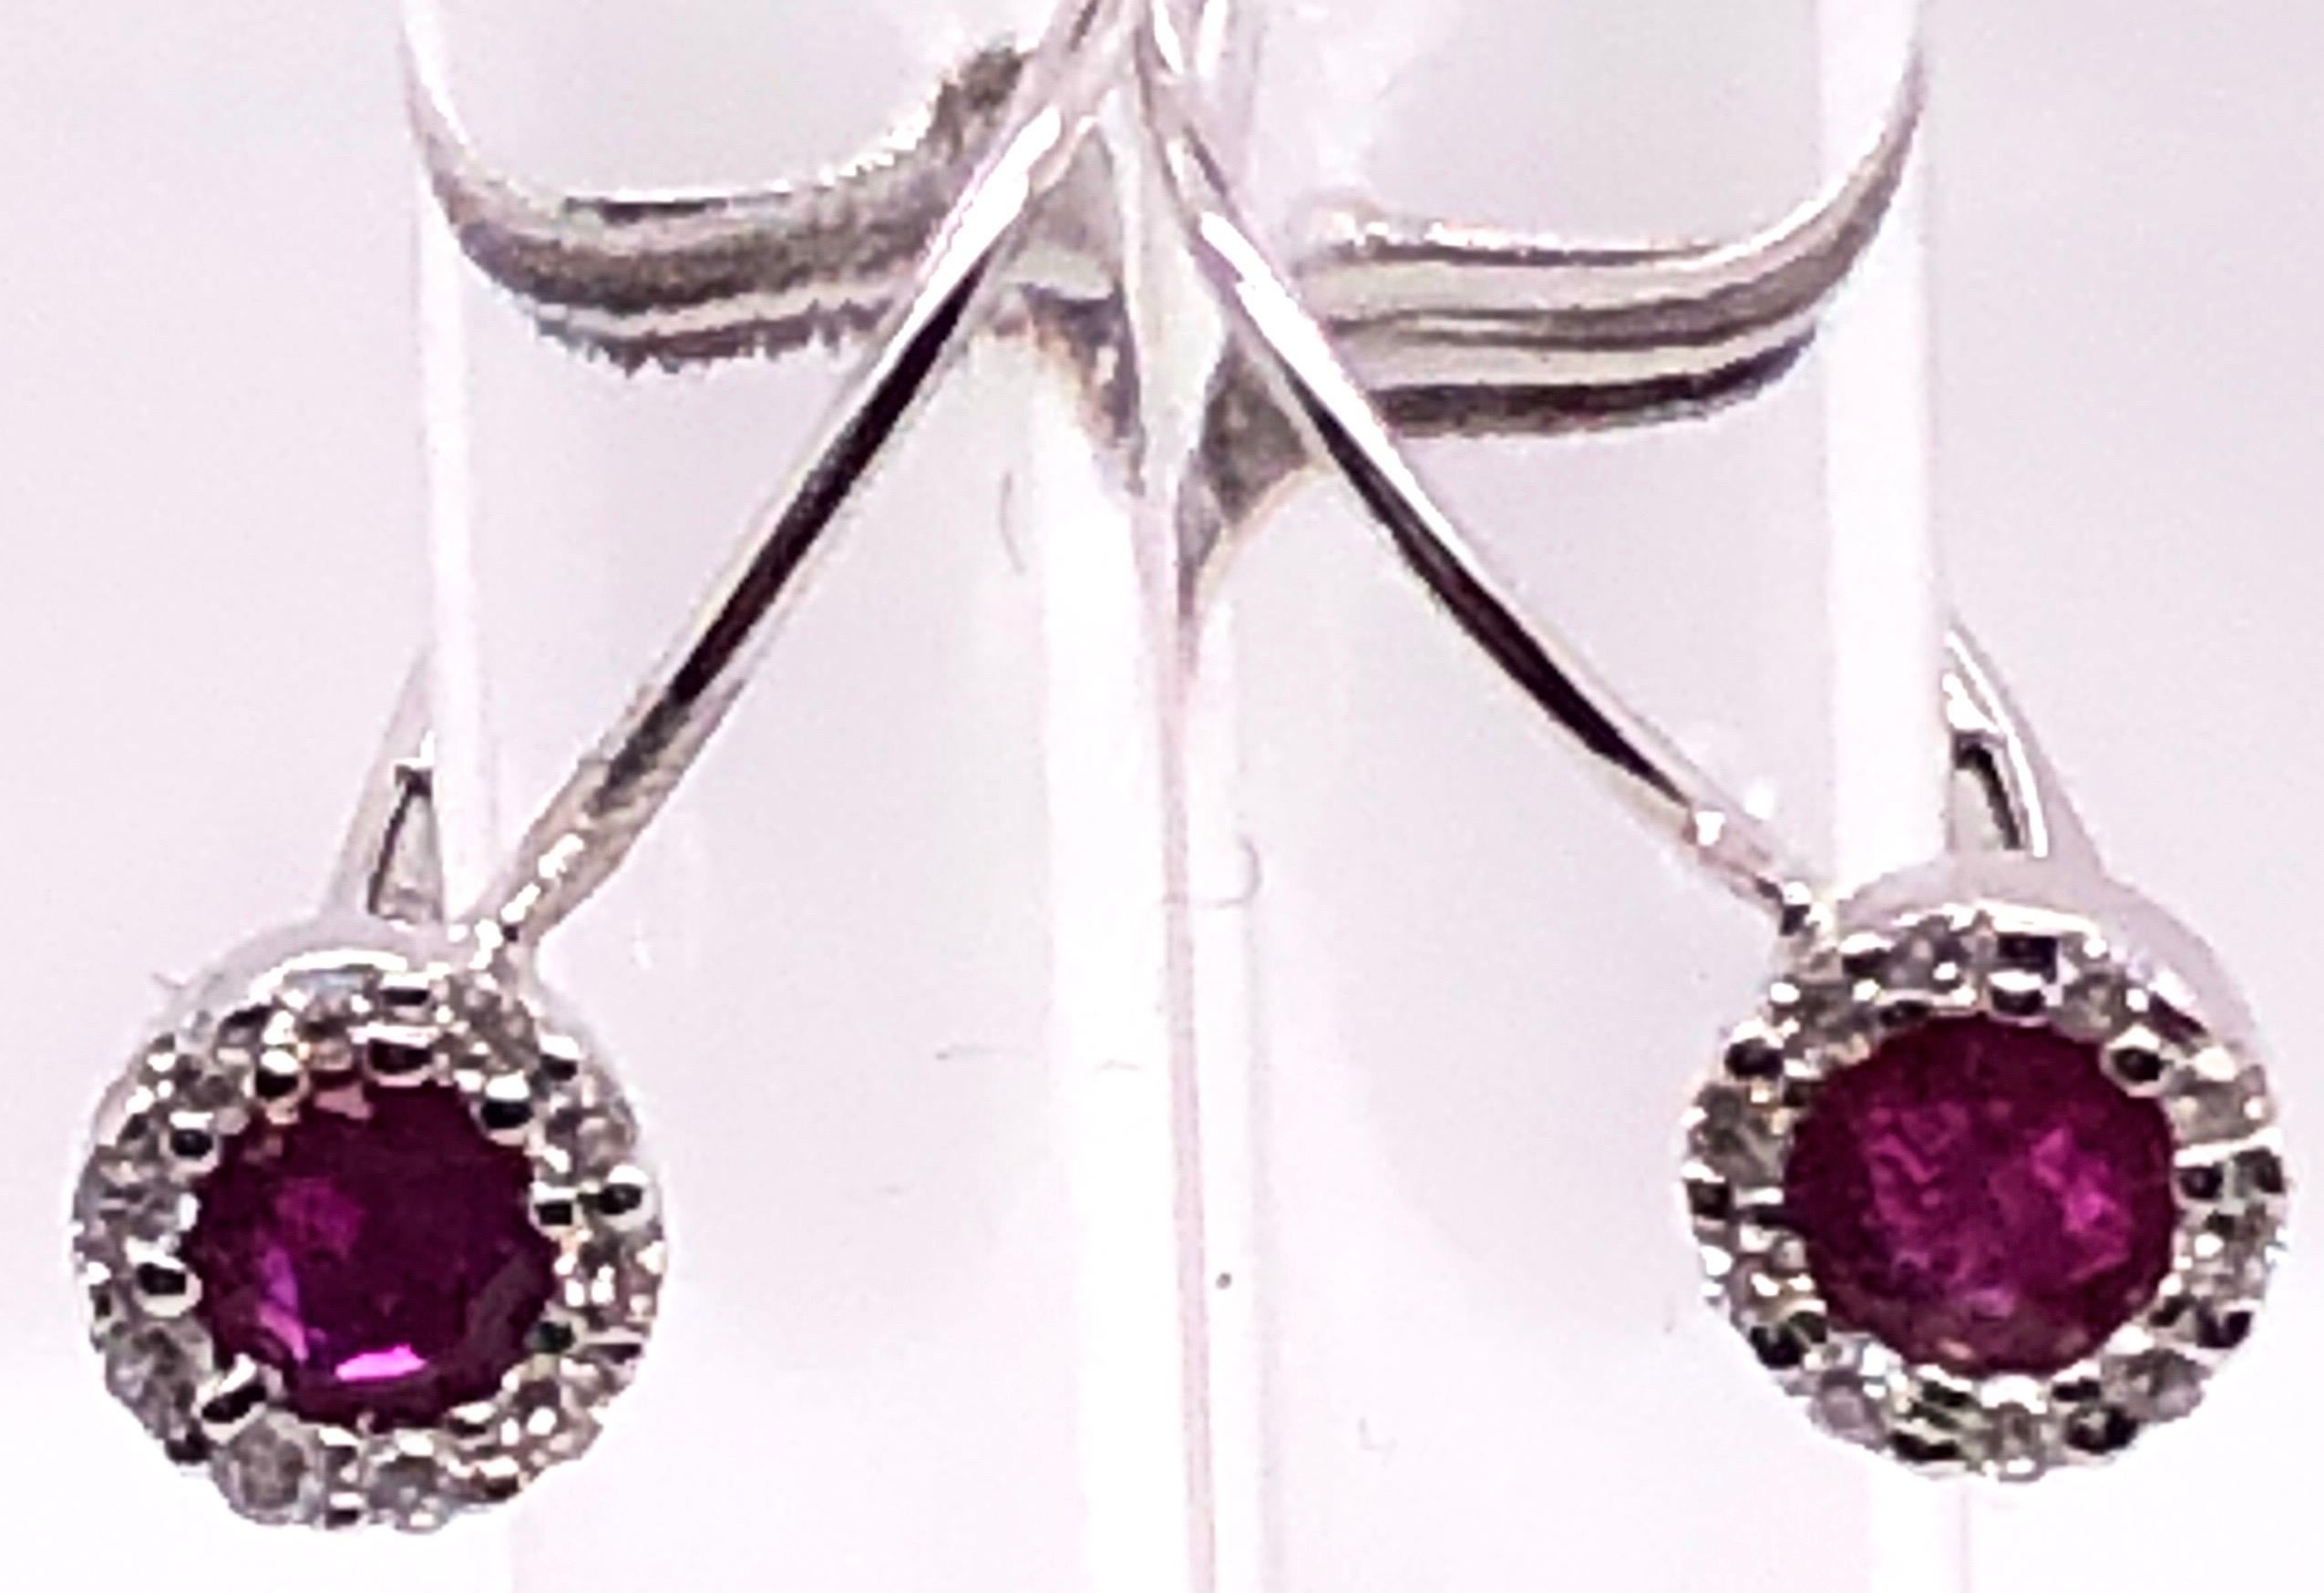 14 Karat White Gold Latch Back Ruby Earrings with Diamonds.
0.20 total diamond weight.
1.08 gram total weight.